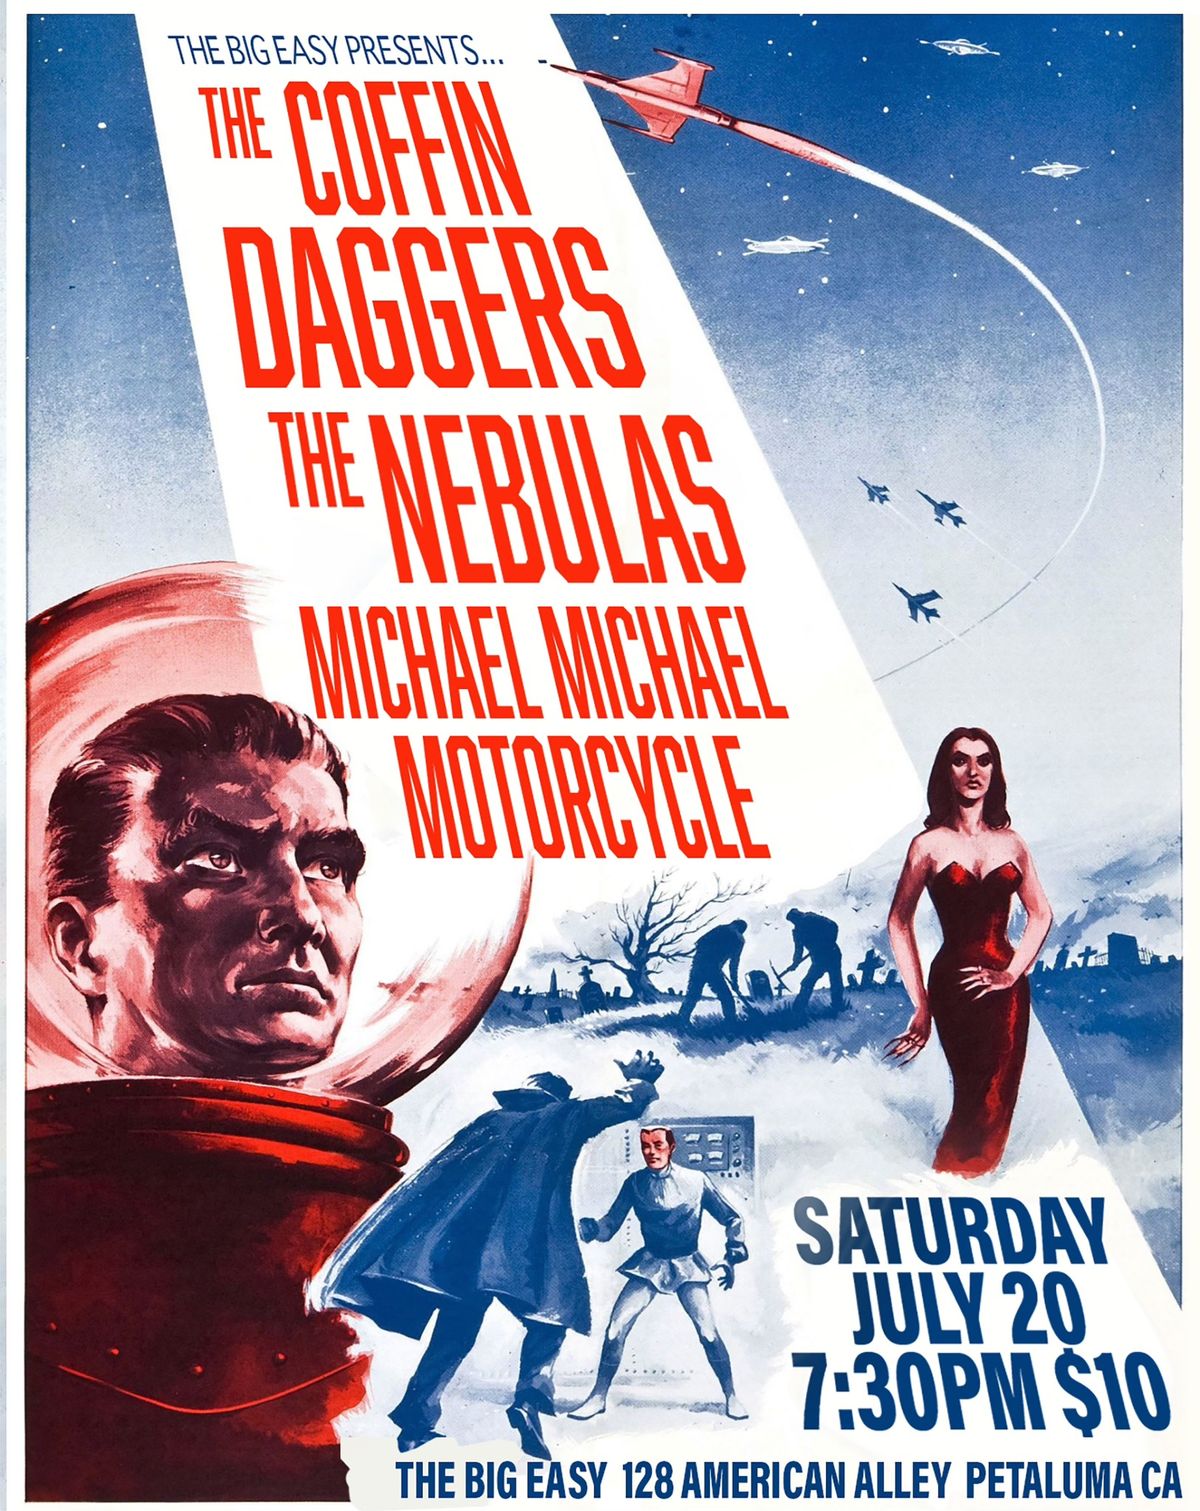 The Coffin Daggers, The Nebulas & Michael Michael Motorcycle @ The Big Easy